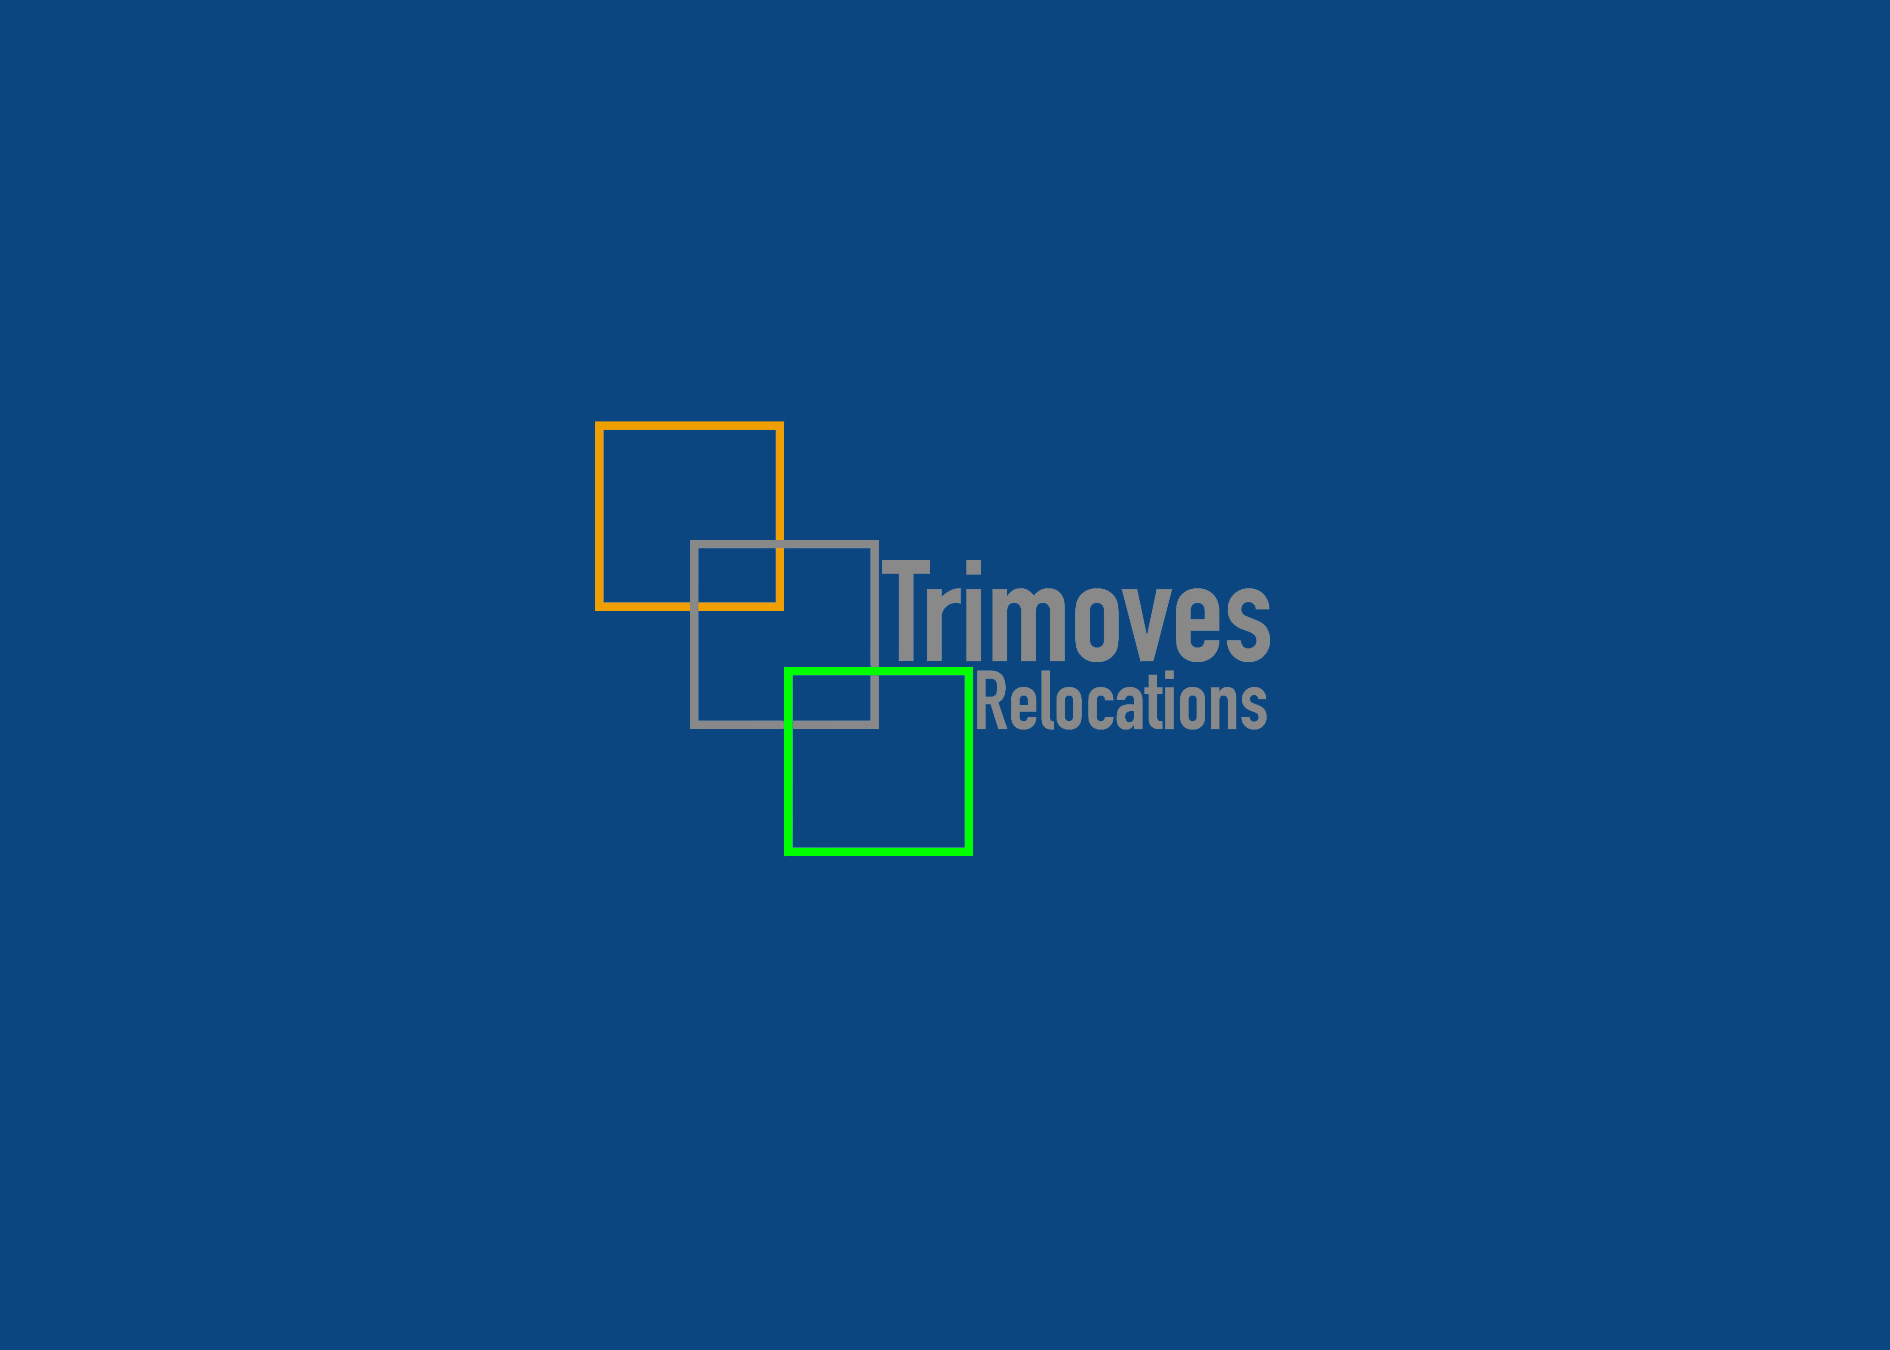 Logo of Trimoves Relocations